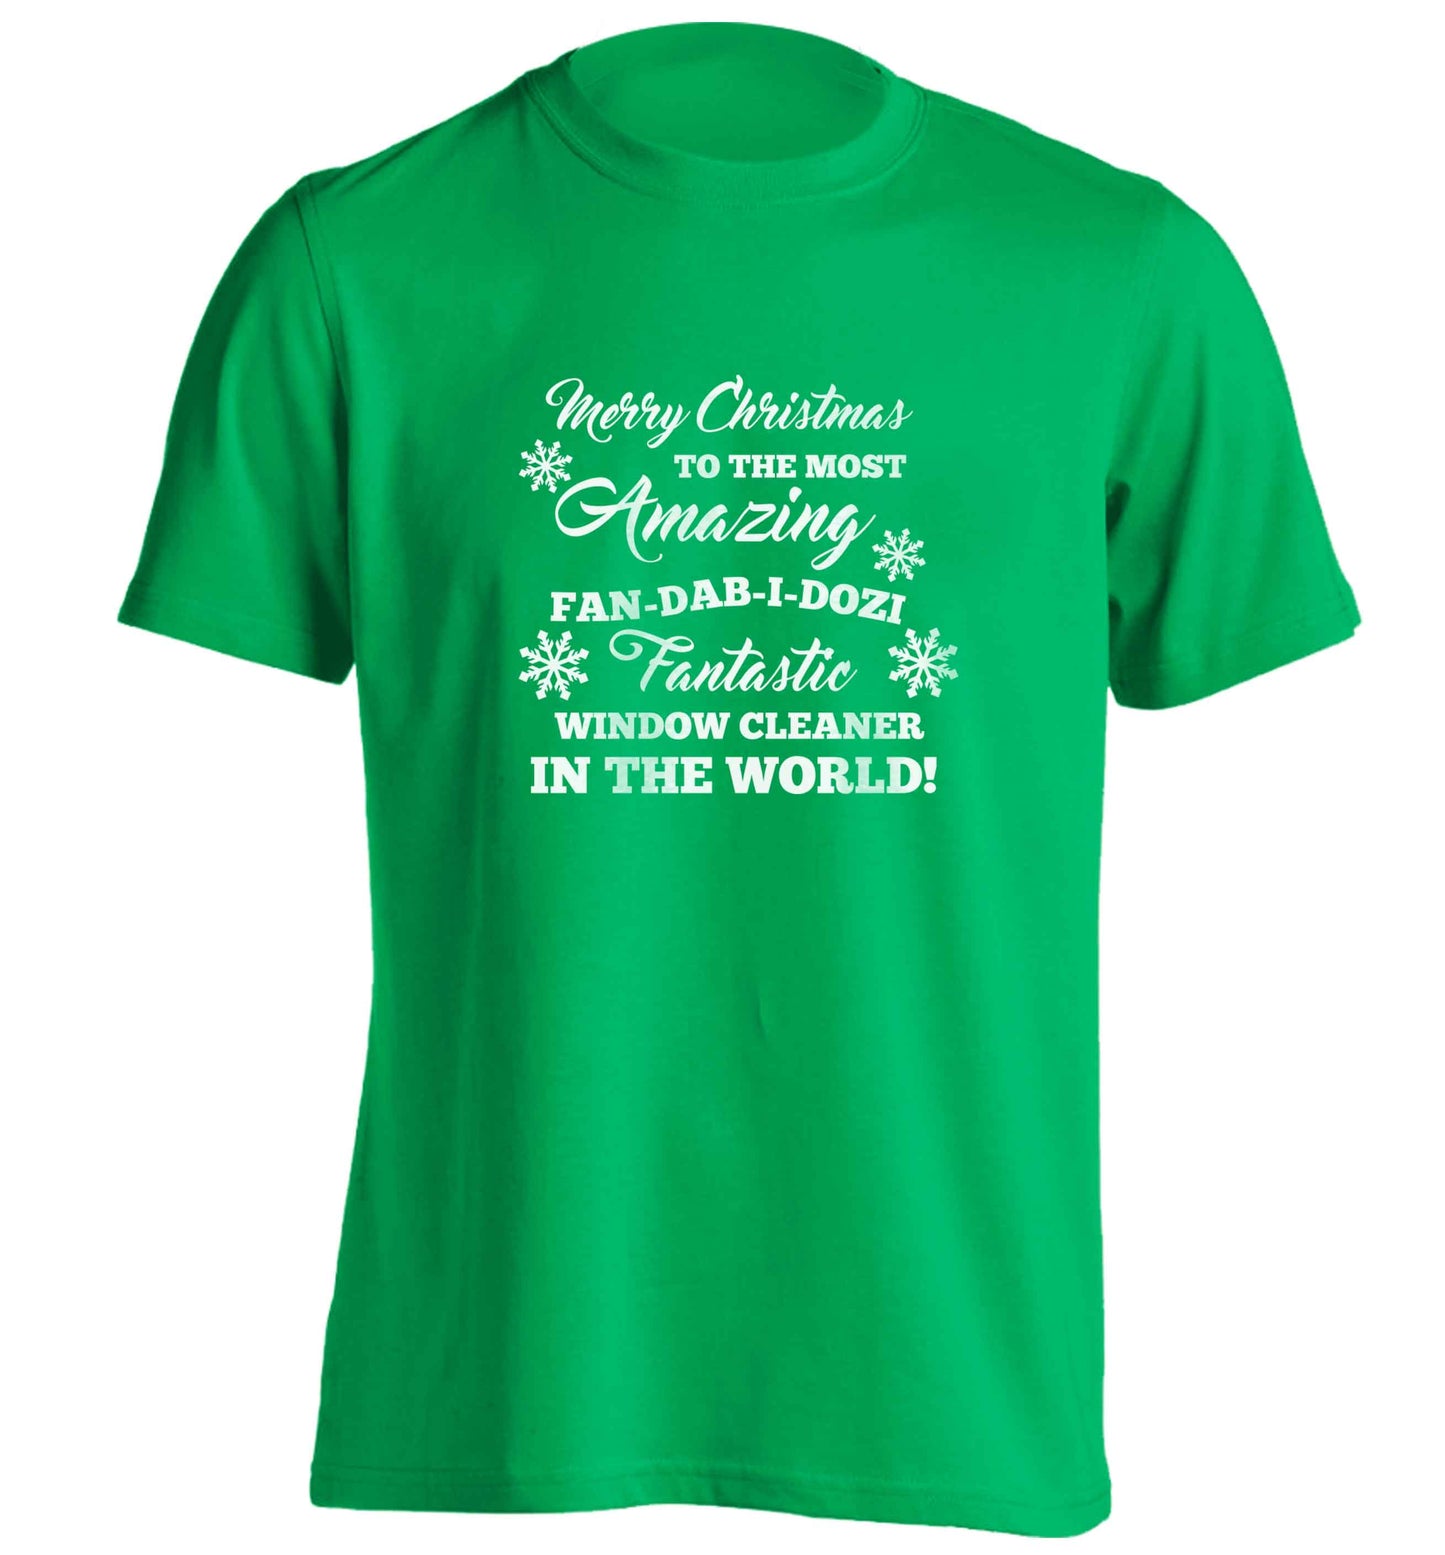 Merry Christmas to the most amazing window cleaner in the world! adults unisex green Tshirt 2XL